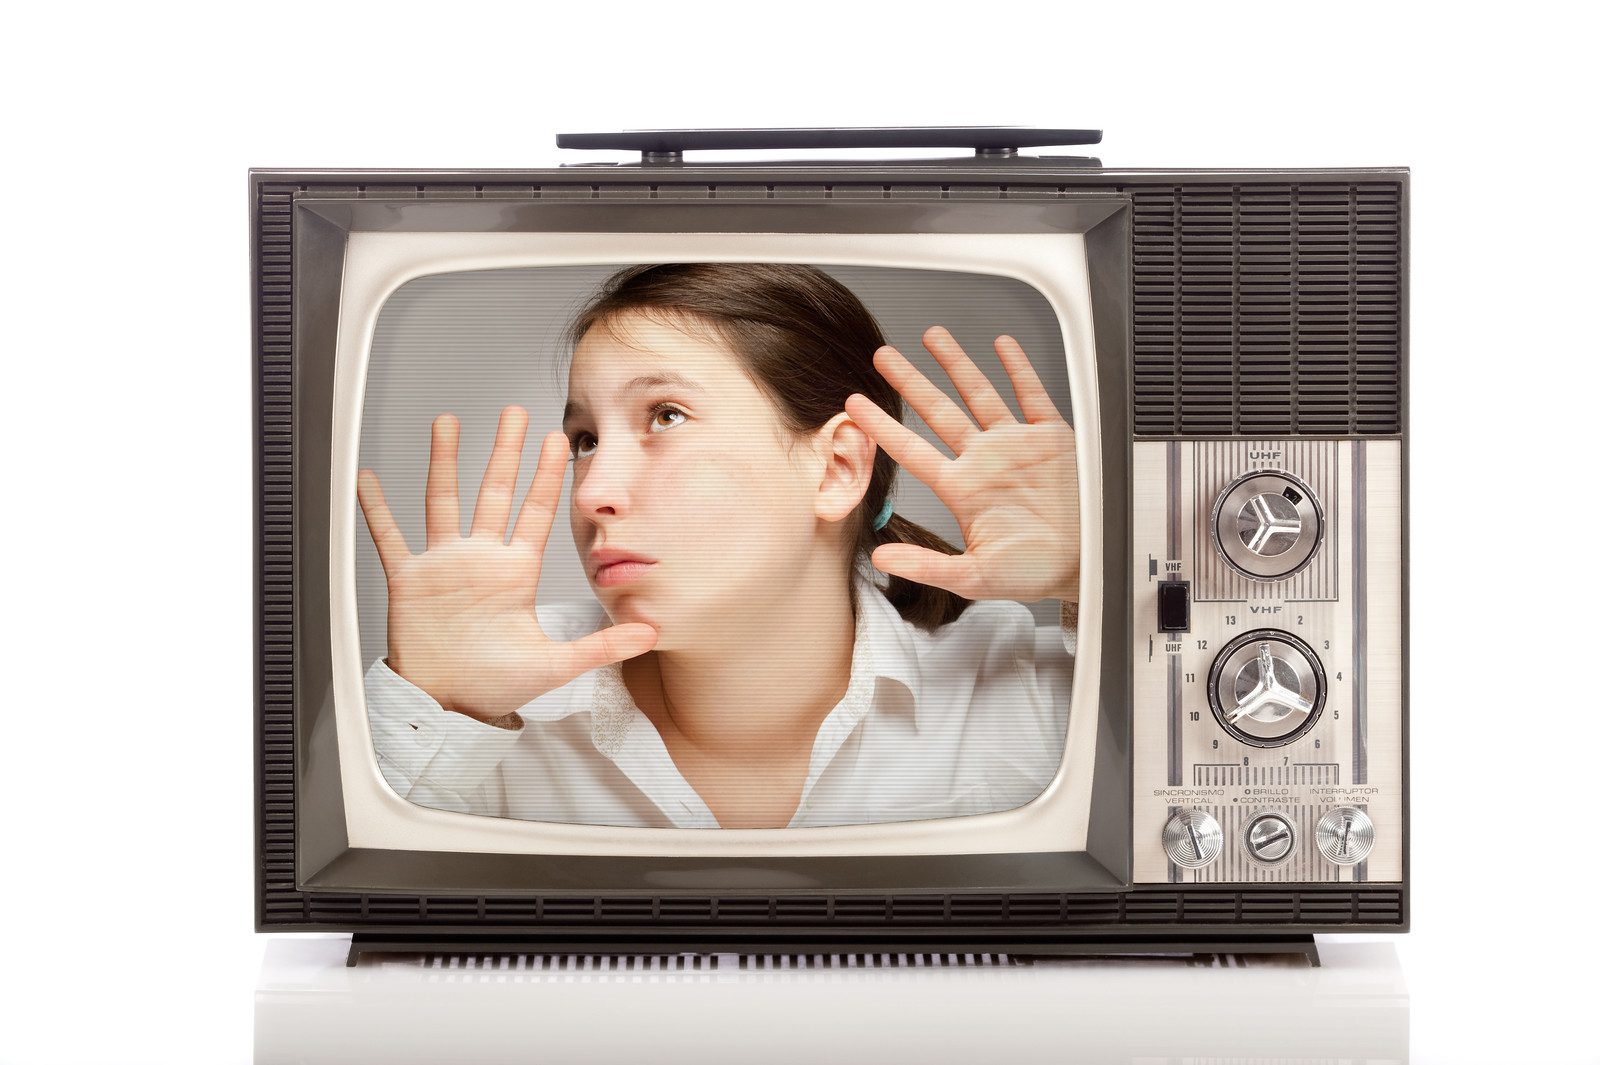 Girl trapped inside a retro portable TV over white background